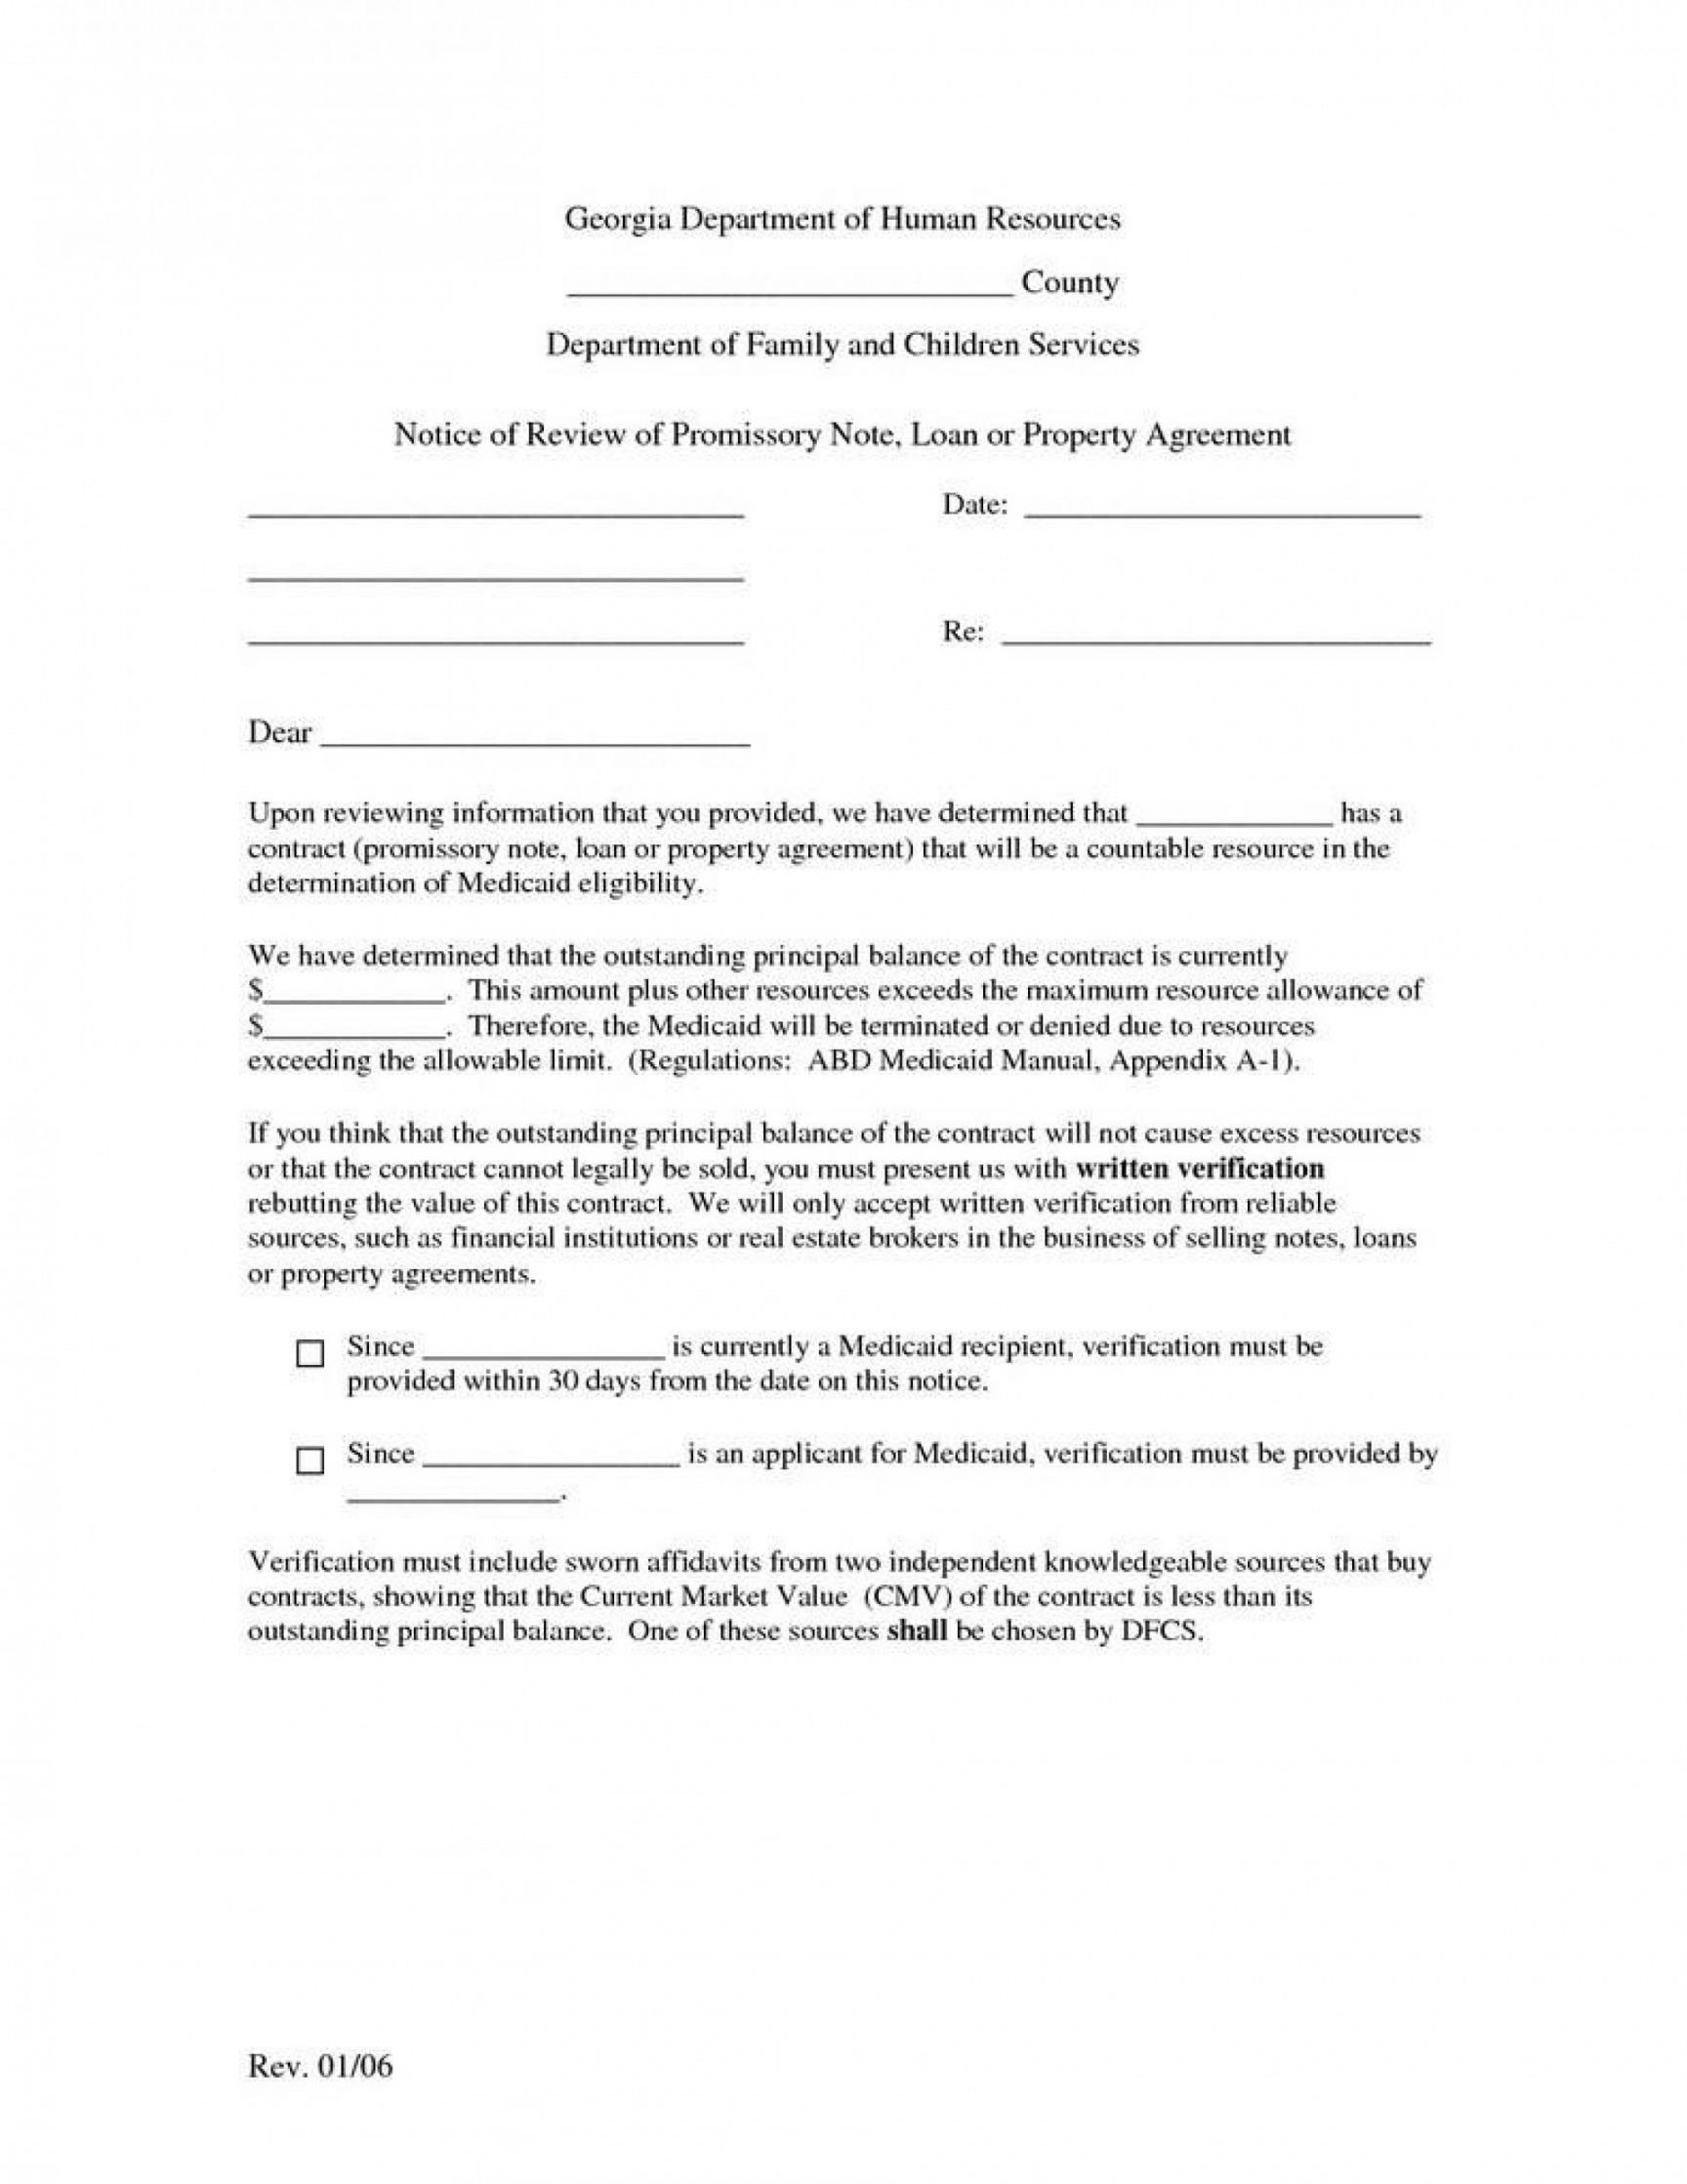 free promissory note template florida ~ addictionary florida promissory note template pdf